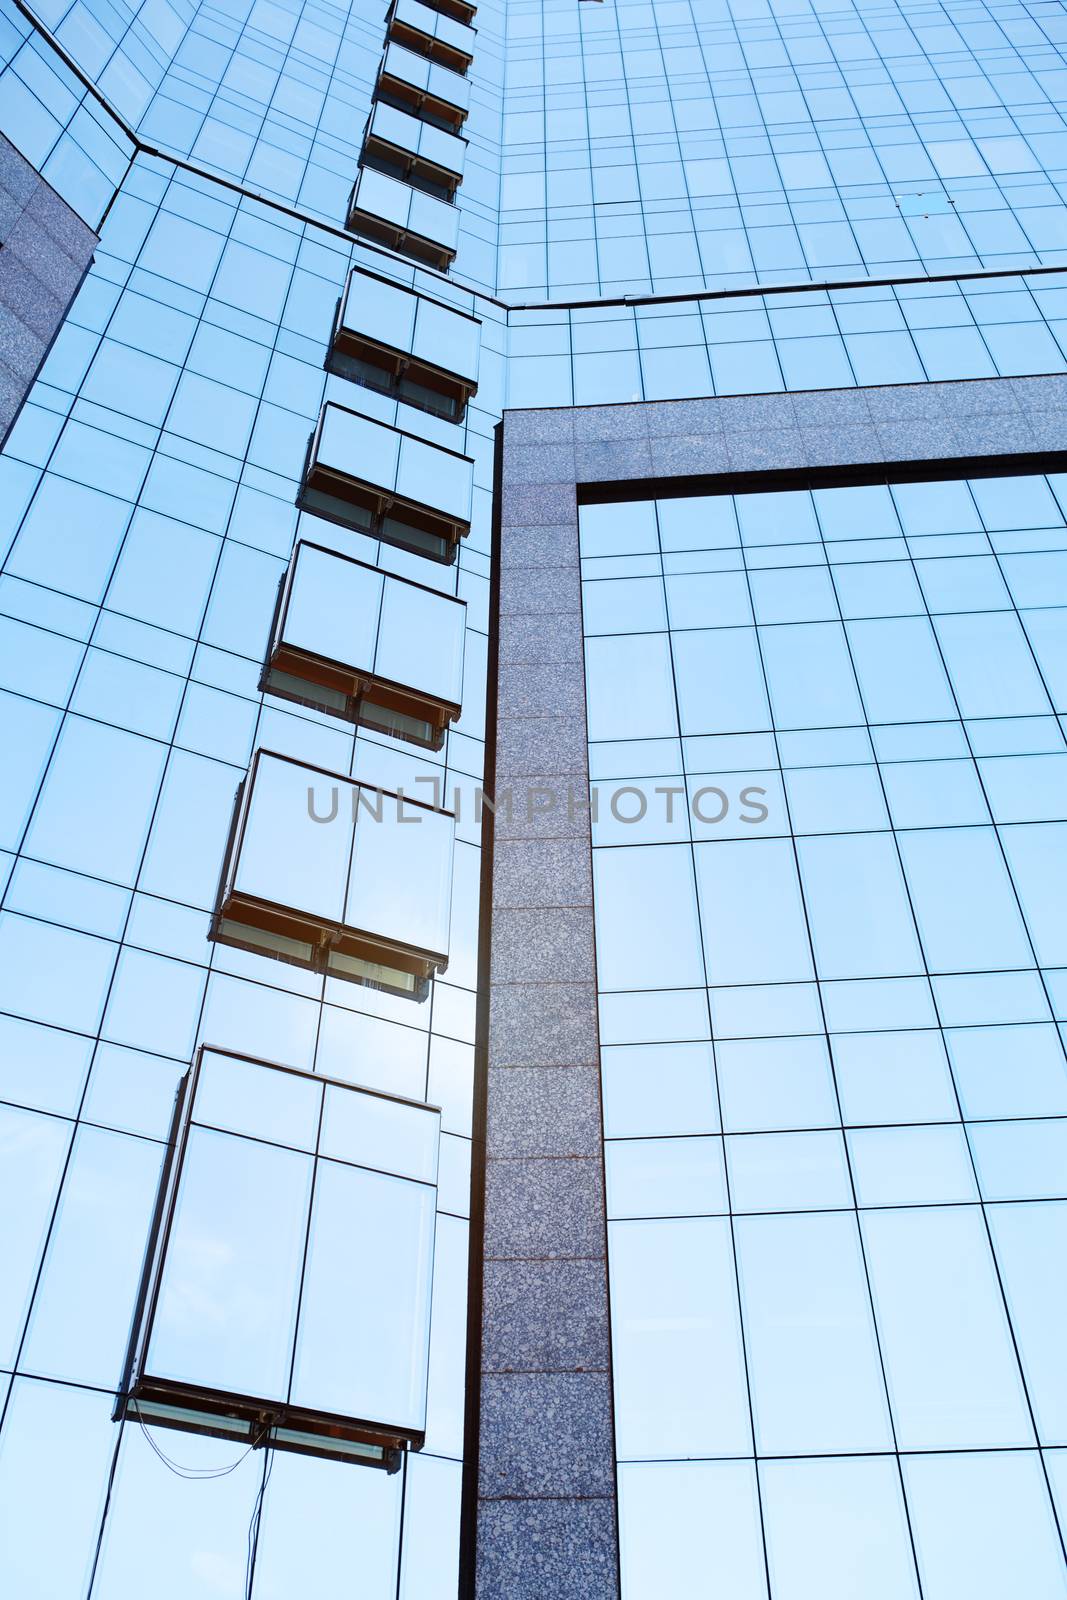 Low Angle View Of Tall Office Buildings. Vertical photo